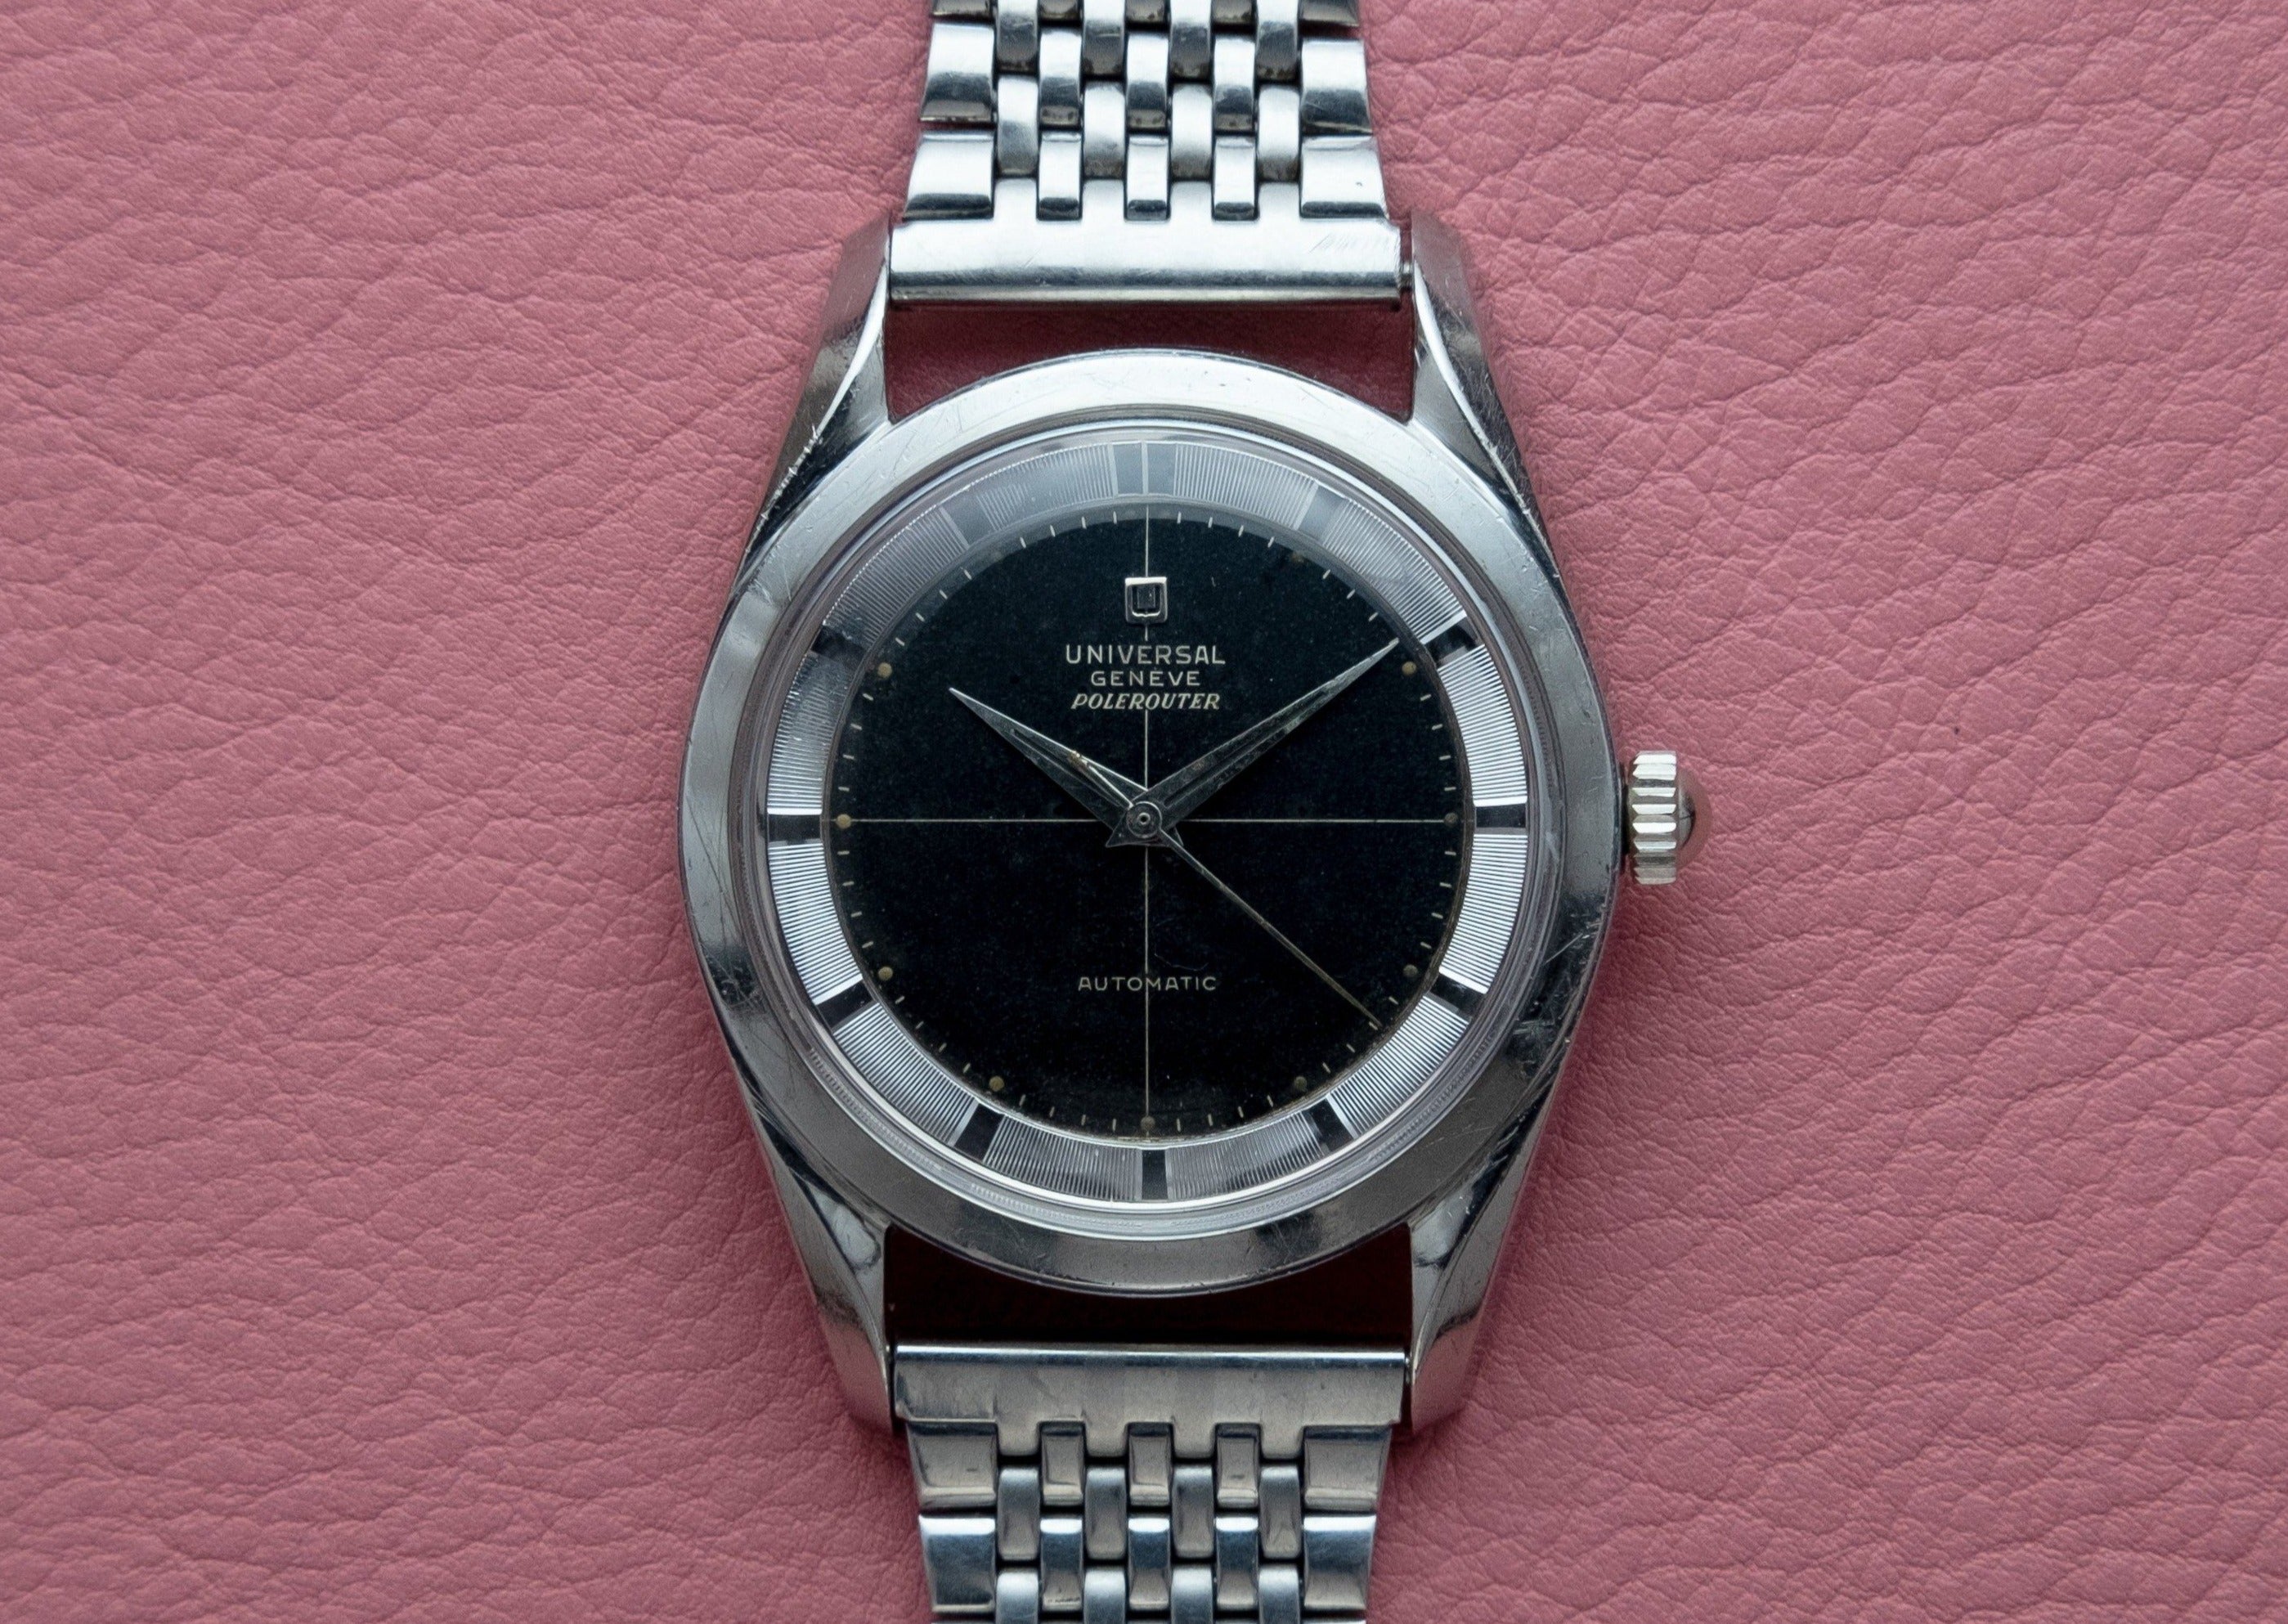 UNIVERSAL GENEVE Automatic Polerouter Ref H 20217-4 (1957)